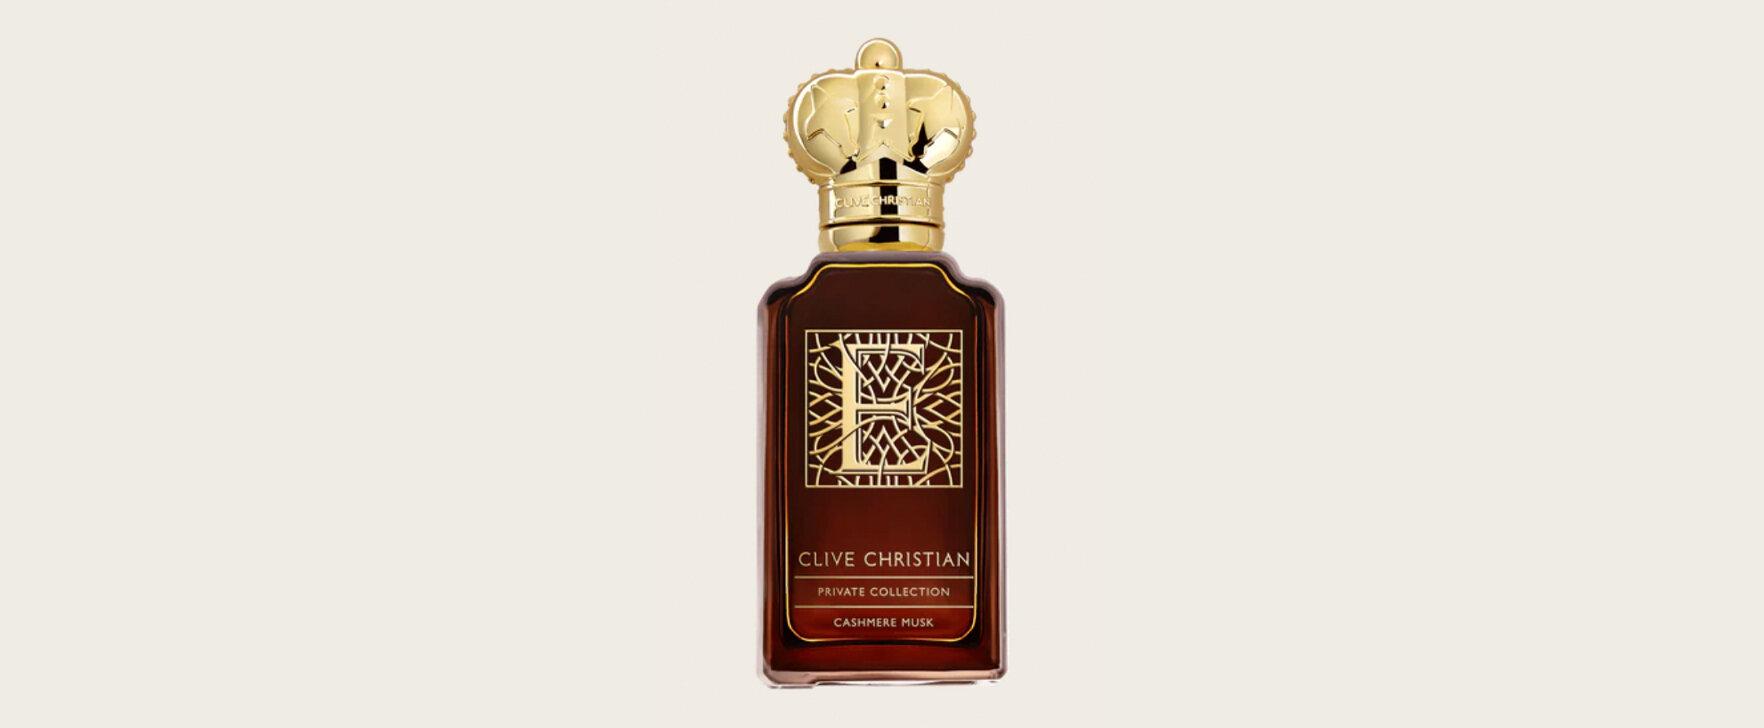 A Touch of Elegance: The New Perfume Private Collection - E: Cashmere Musk by Clive Christian